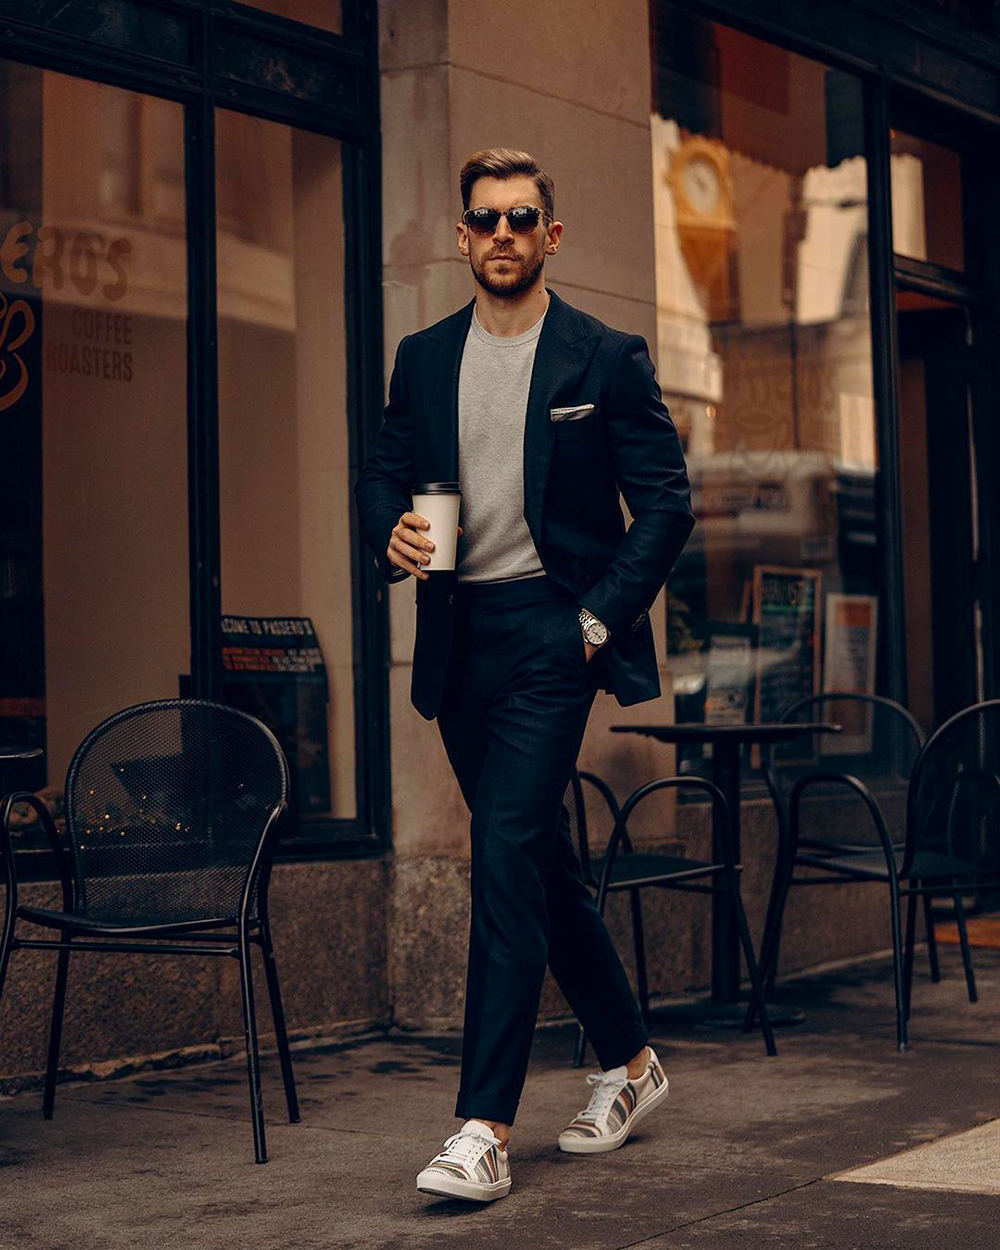 Wearing a navy suit, gray long sleeve t-shirt, and low top sneakers